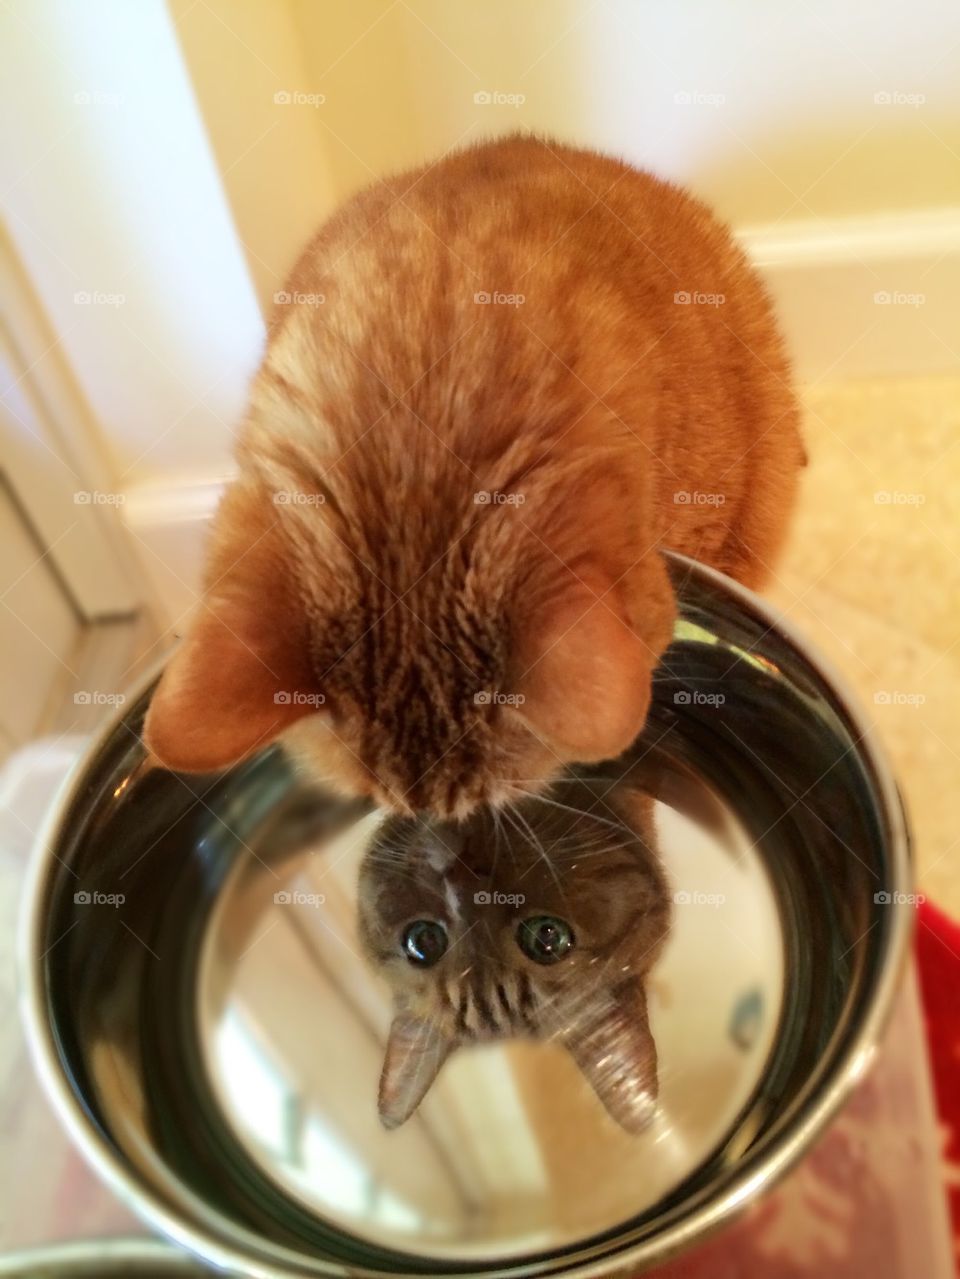 Reflection of cute cat in bowl